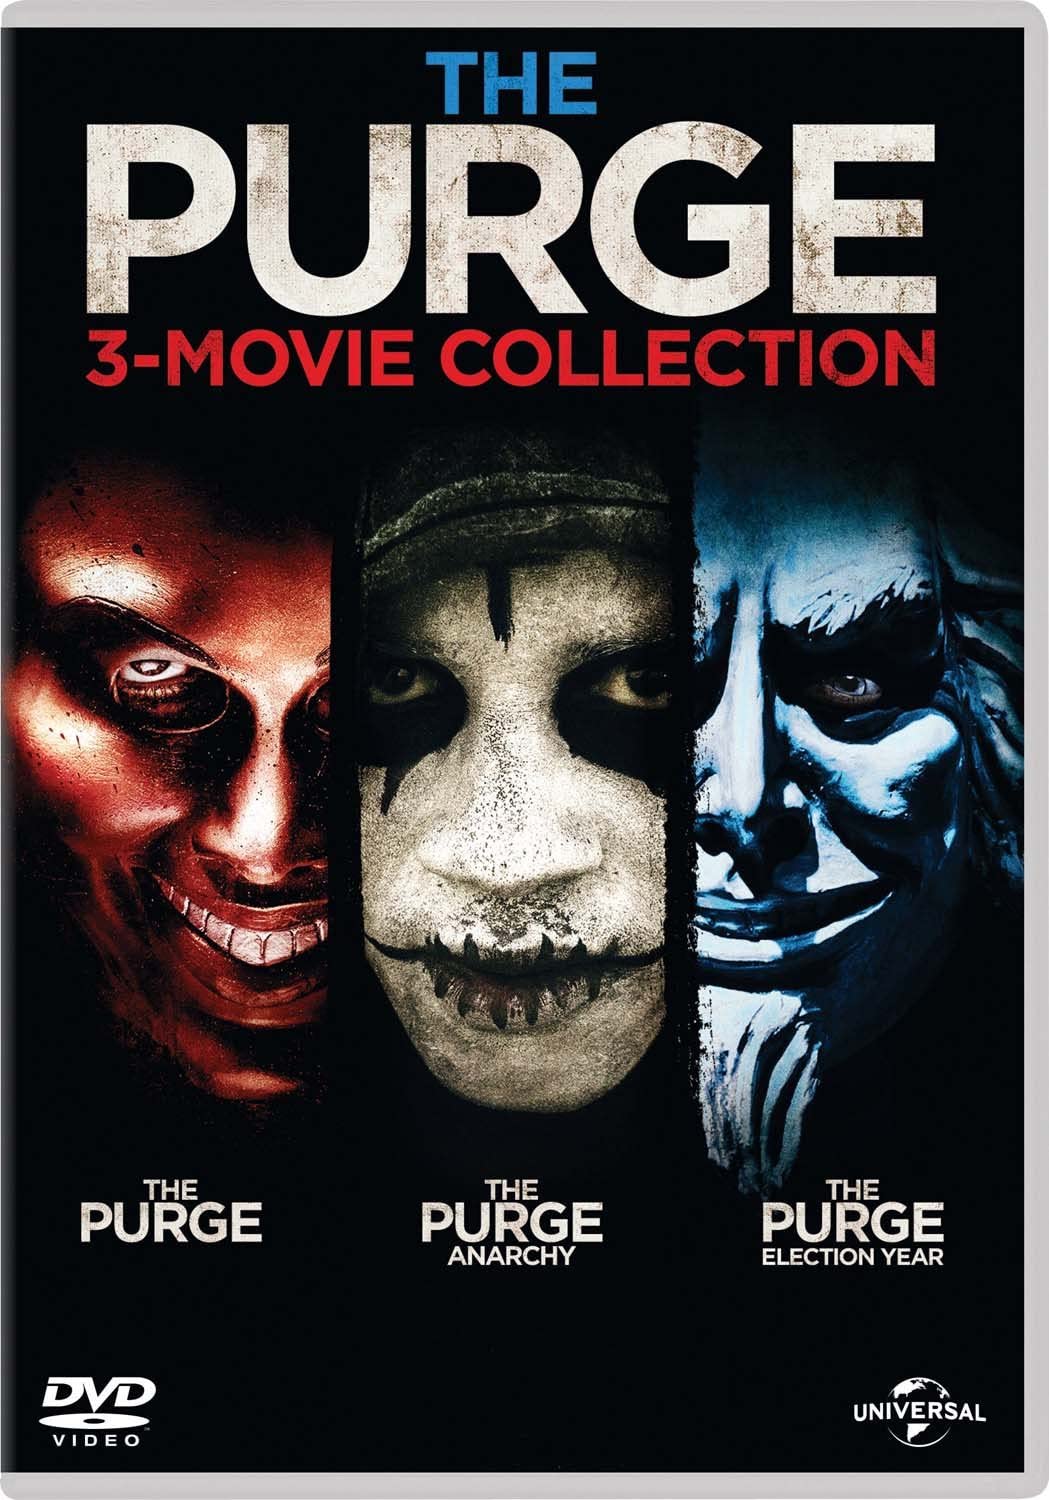 The Purge - 3 Movie Collection - Horror/Thriller [DVD]